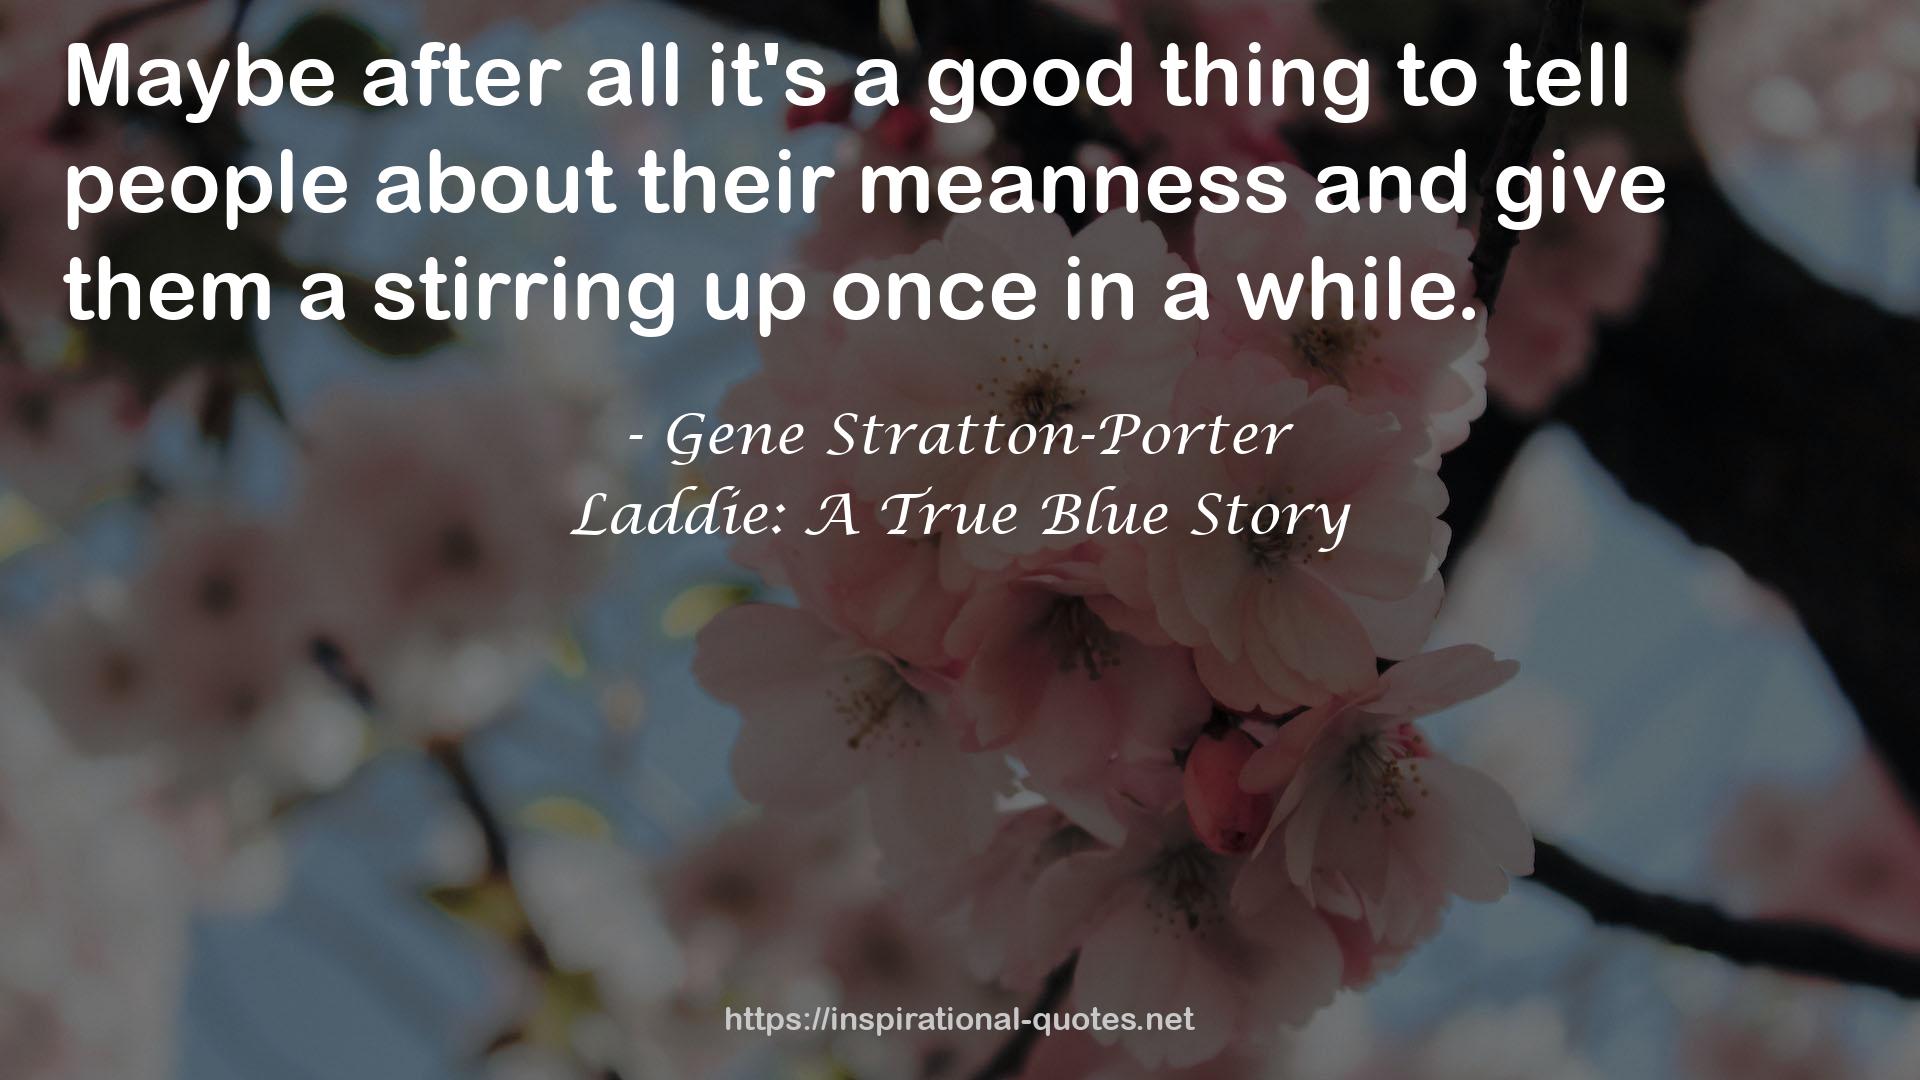 Laddie: A True Blue Story QUOTES